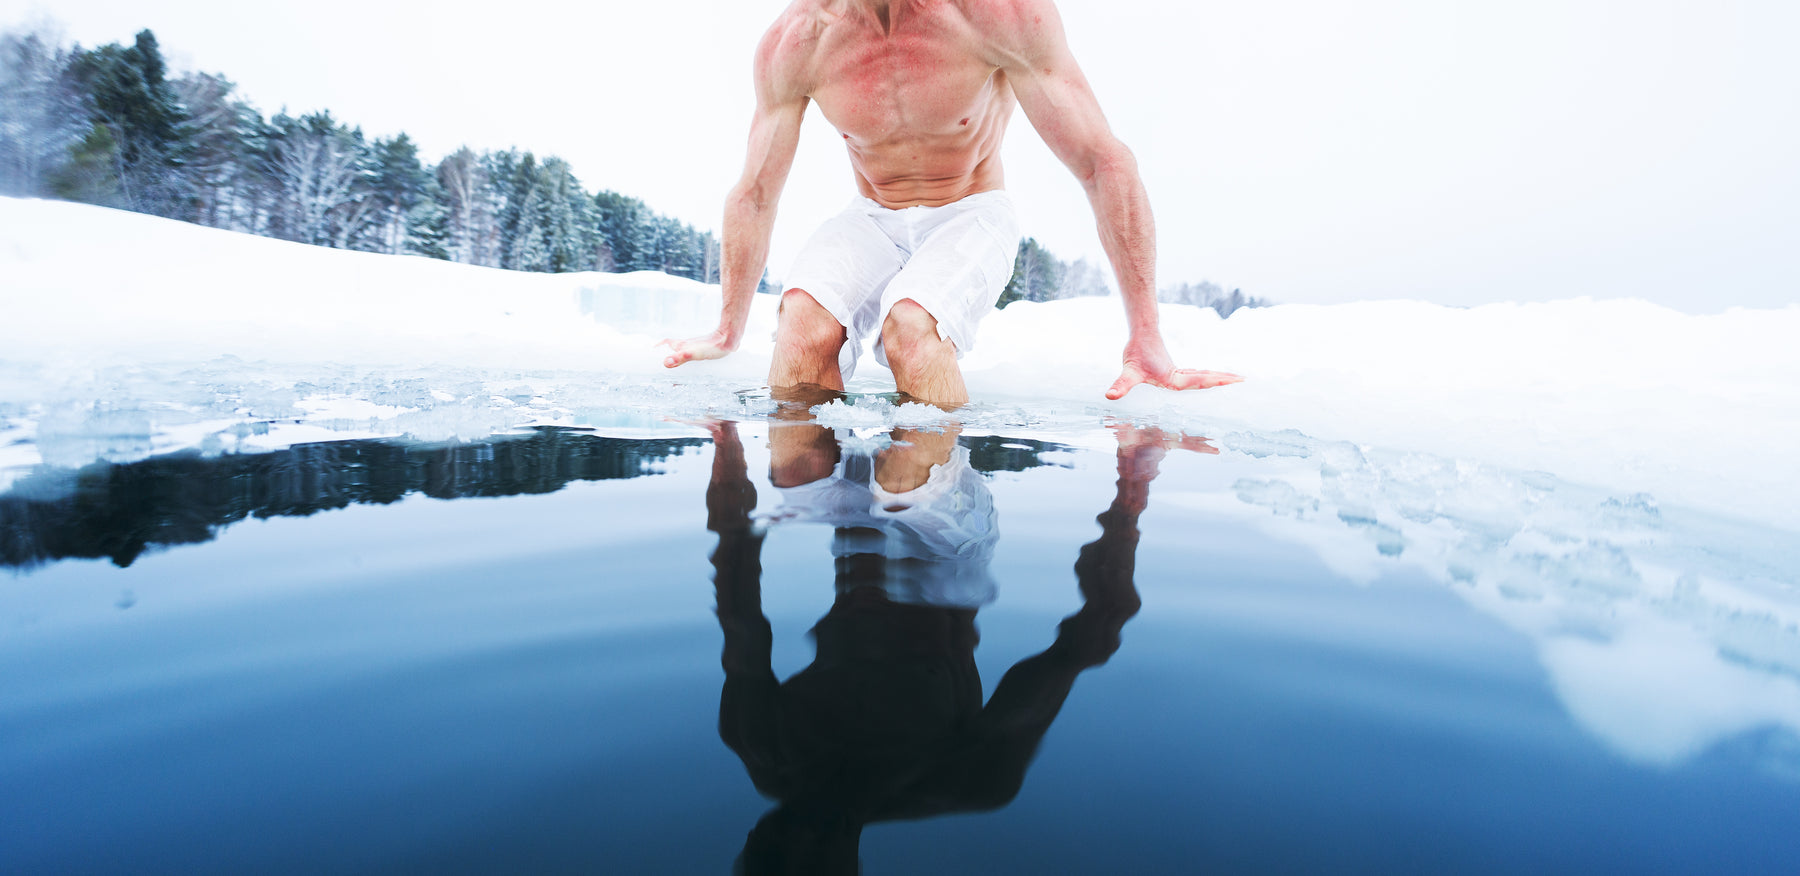 Diving Deep into Wellness: The Cold Plunge Phenomenon